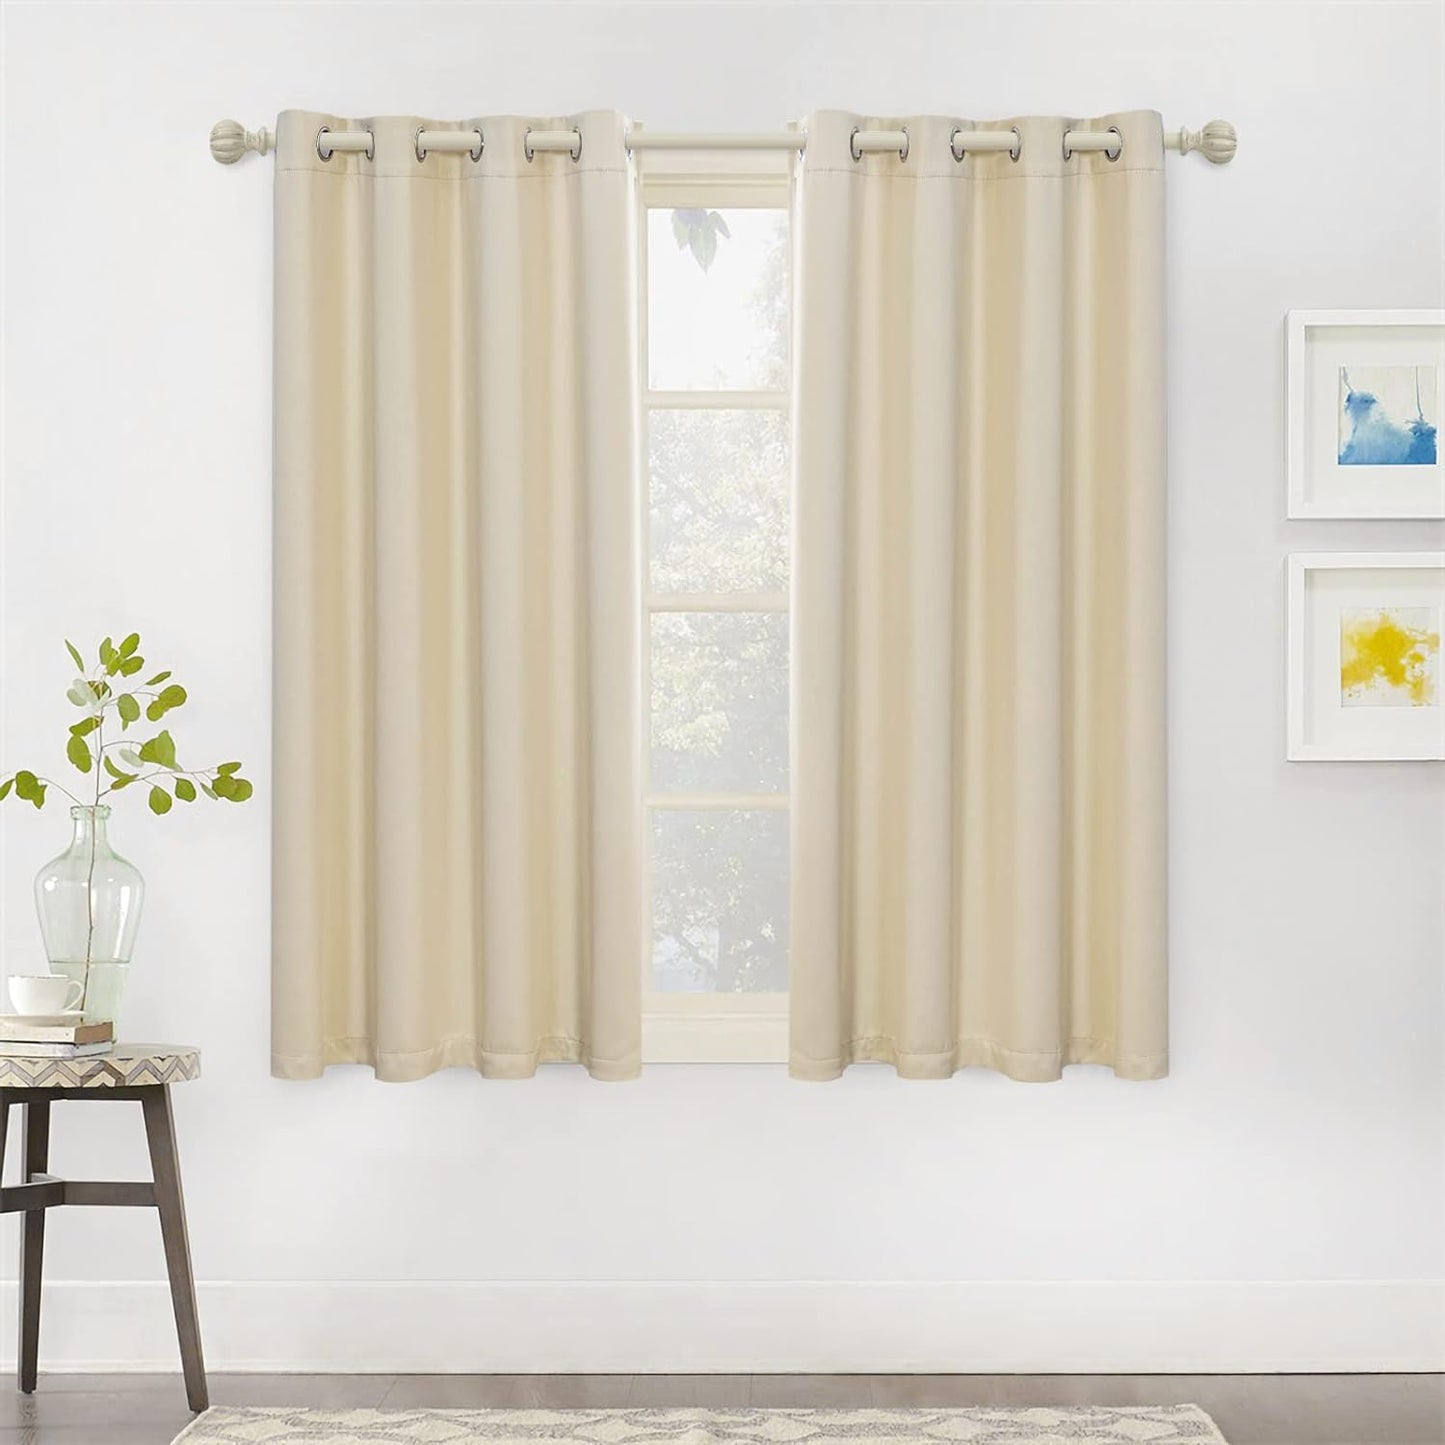 MYSKY HOME Black Curtains for Bedroom 90 Inch Long Blackout Curtains for Living Room 2 Panels Thermal Insulated Grommet Room Darkening Curtains Privacy Protect Window Drapes, 52 X 90 Inches, Black  MYSKY HOME Beige 52W X 63L 